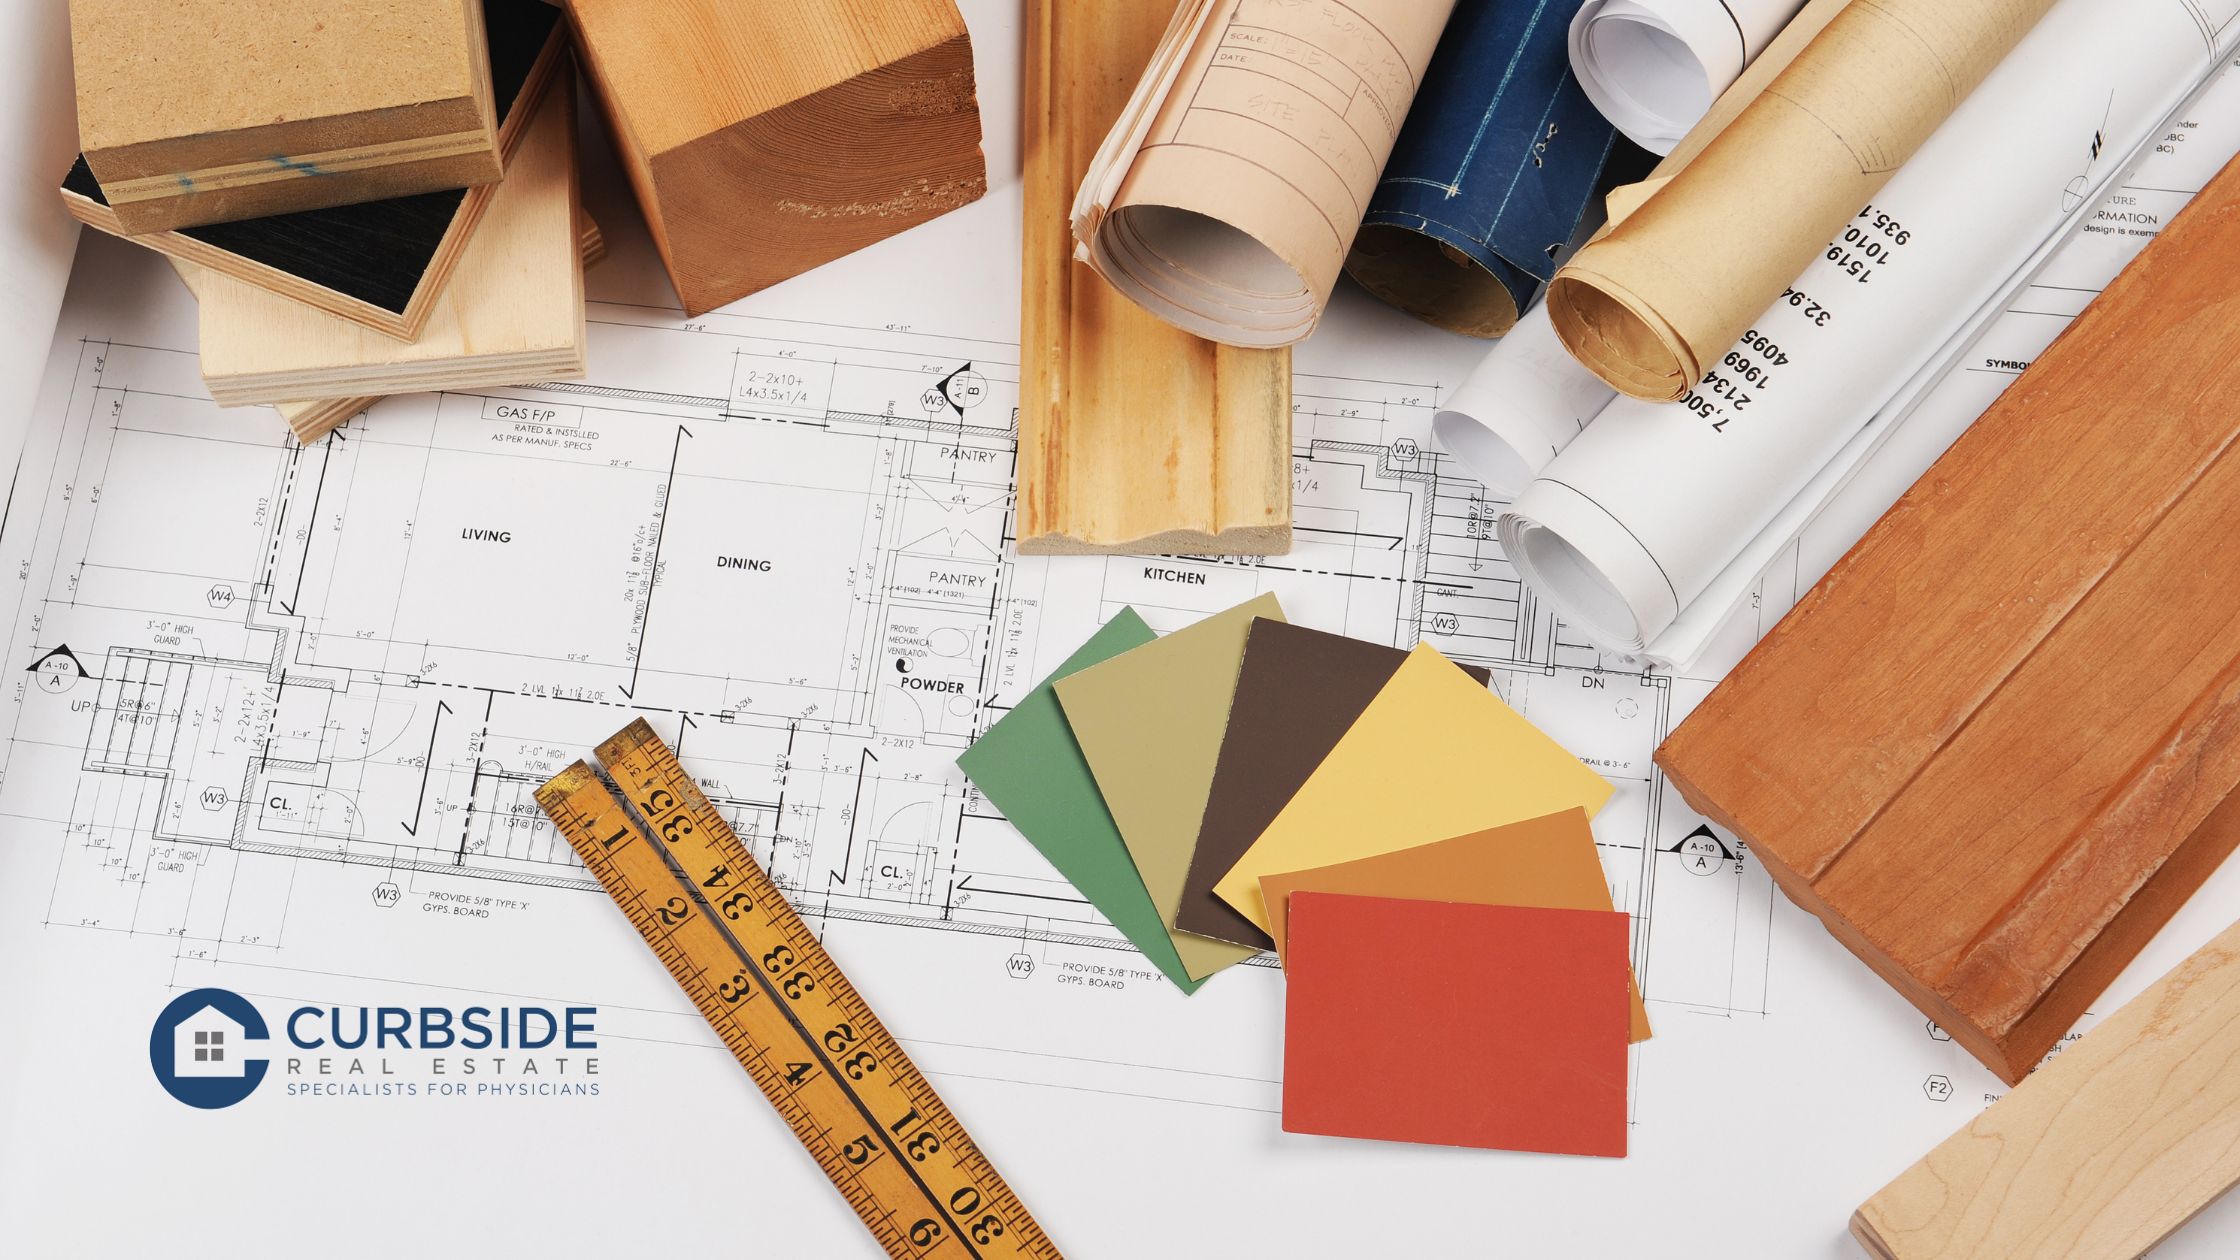 Renovation Tips to Elevate Your Home’s Value